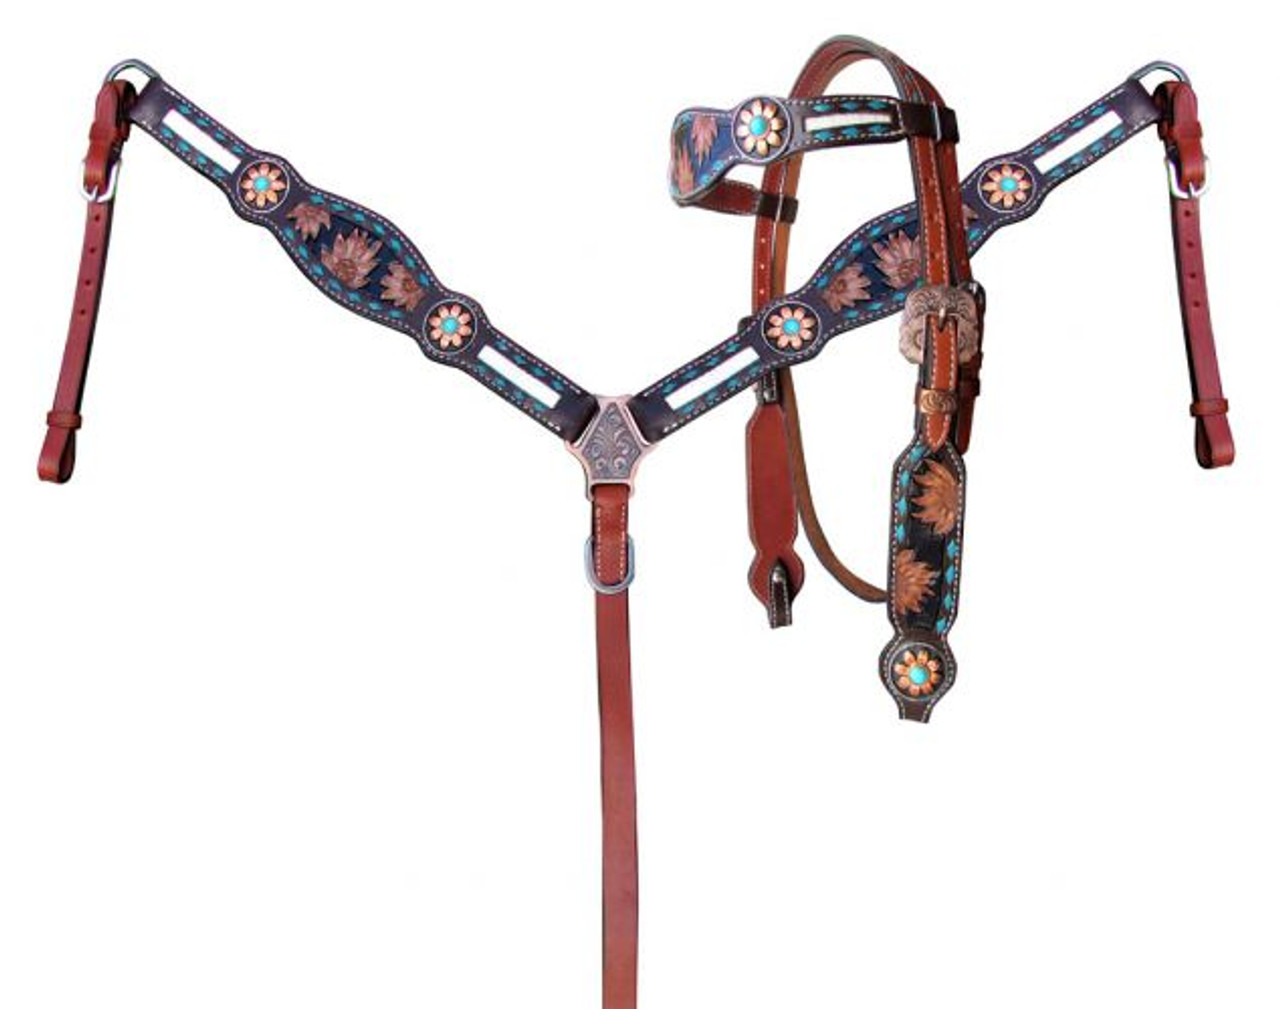 Showman Pony Hand Painted Sunflower Leather Headstall & Breast Collar Set 